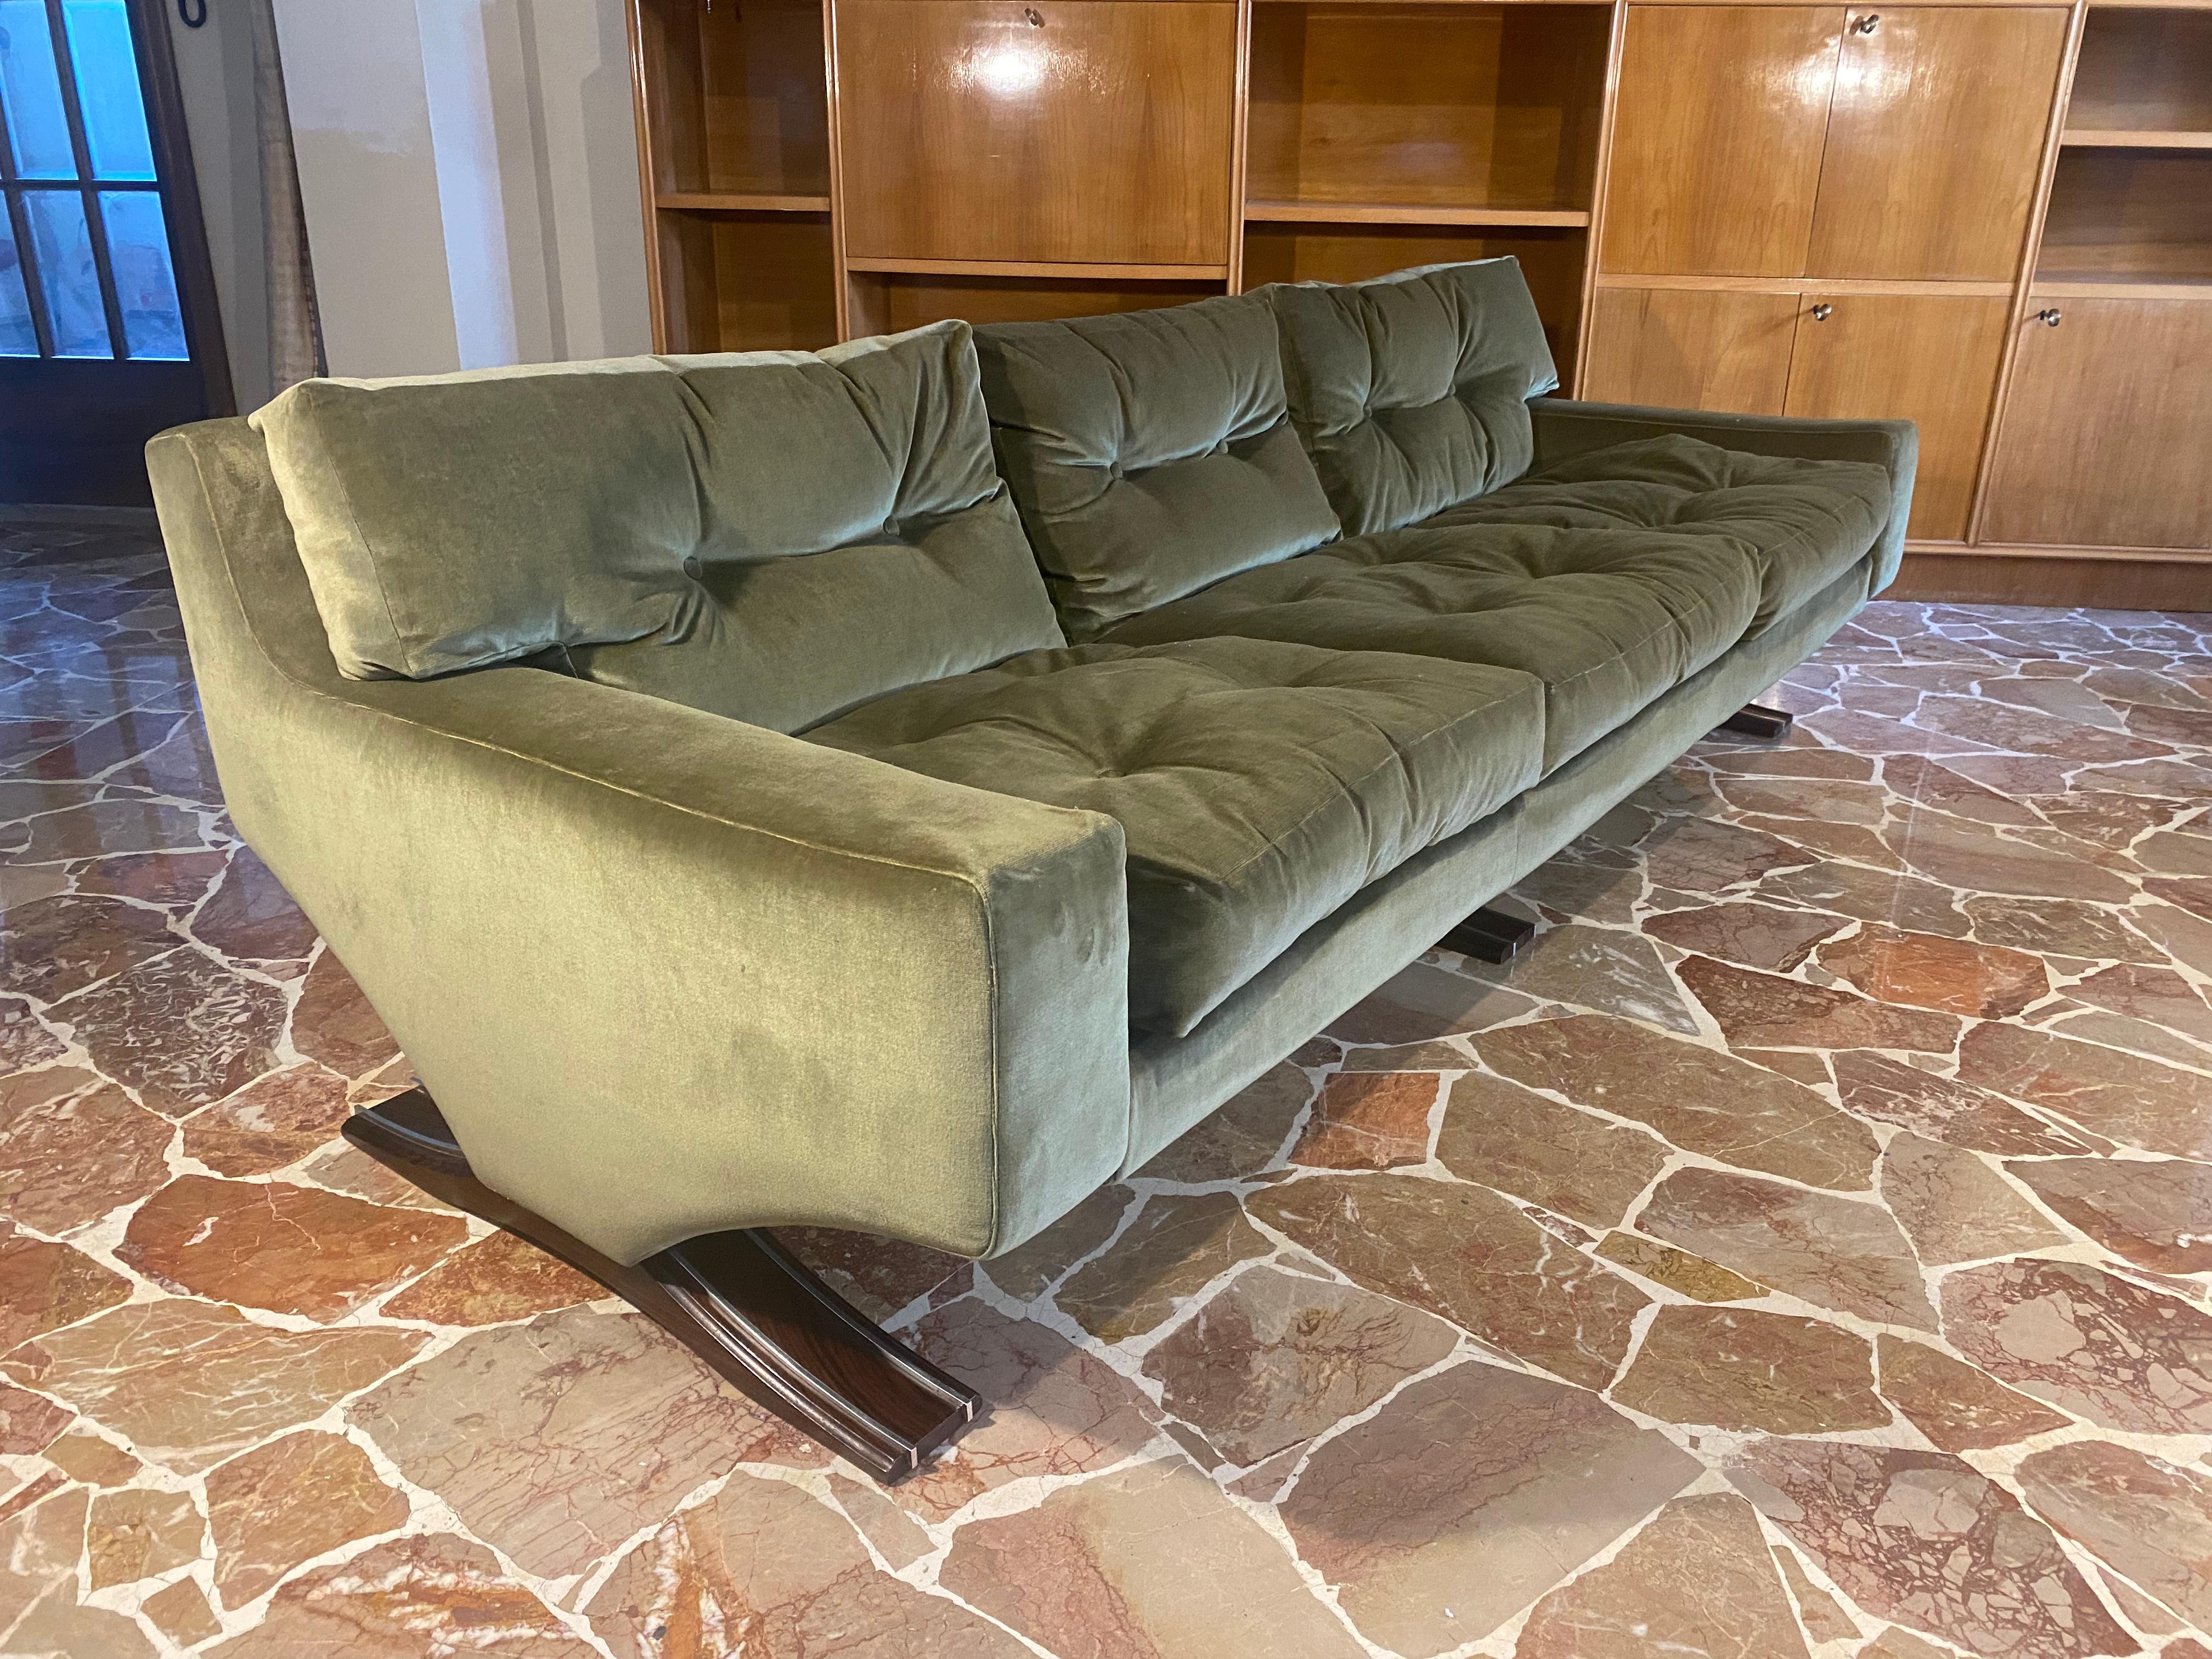 Rare and beautiful living room set in olive green velvet, composed of the three-seat sofa and two armchairs designed by Italian sculptor Franz Sartori for Flexform, Milan, Italy, 1965
Sartori is best known for his organic sculptures, but he also